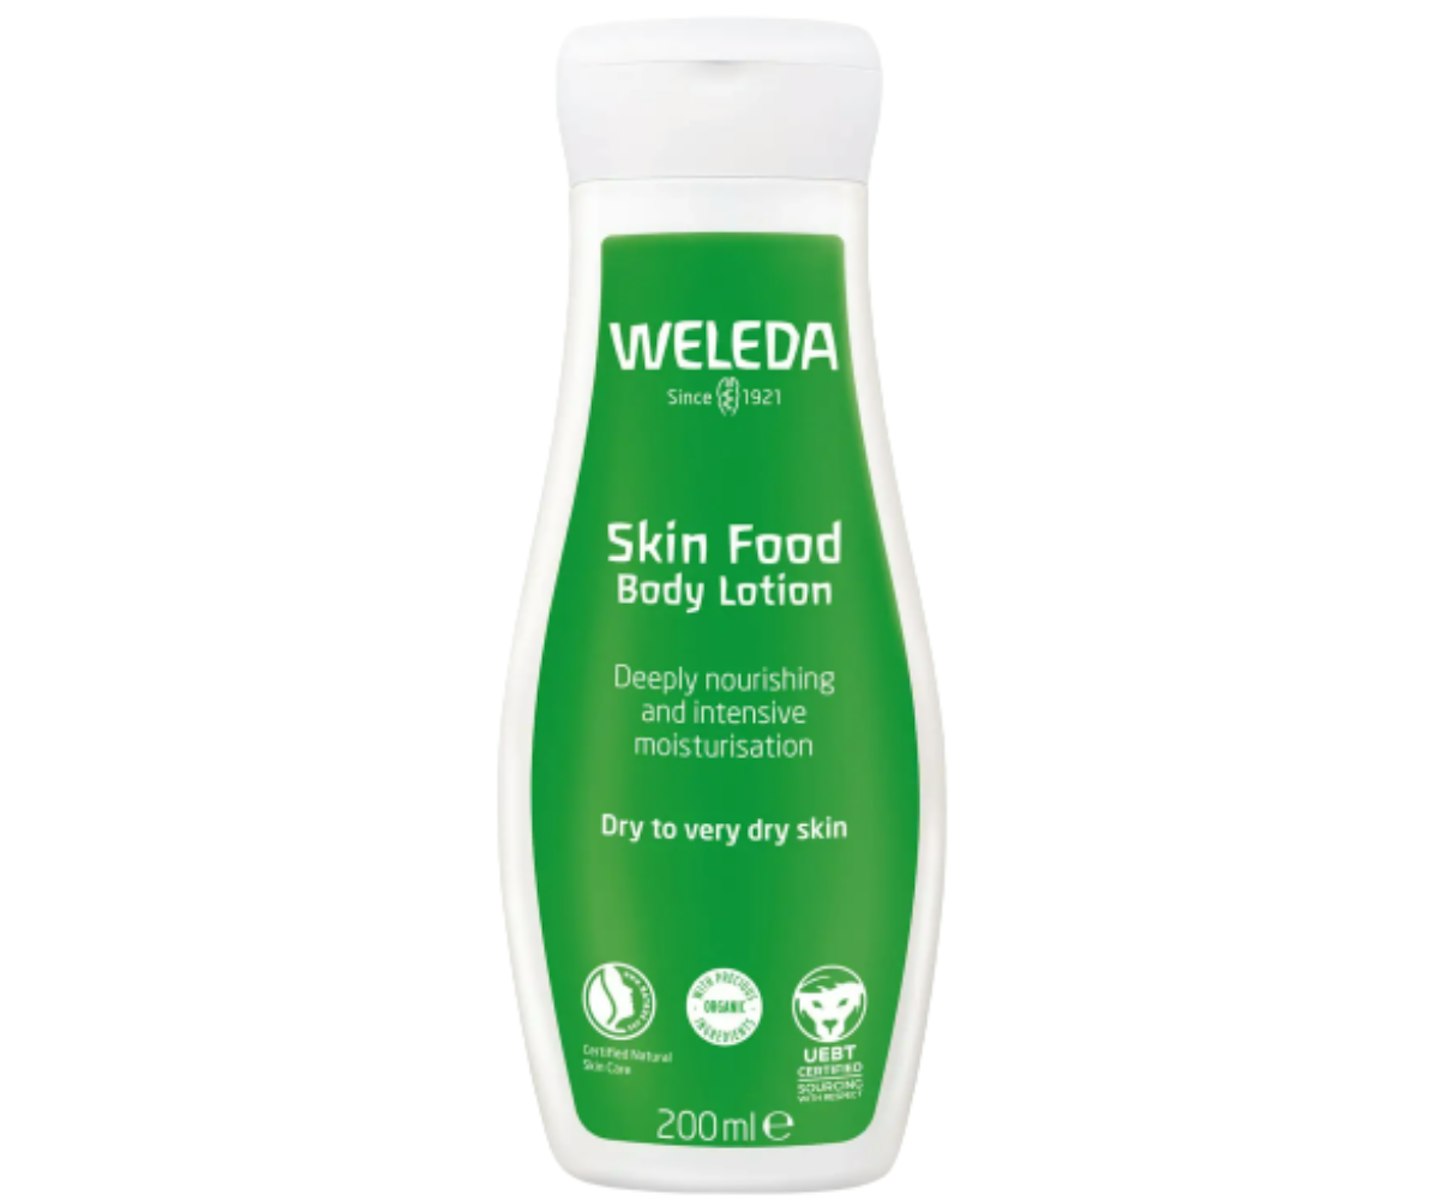 A picture of the Weleda Skin Food Body Lotion